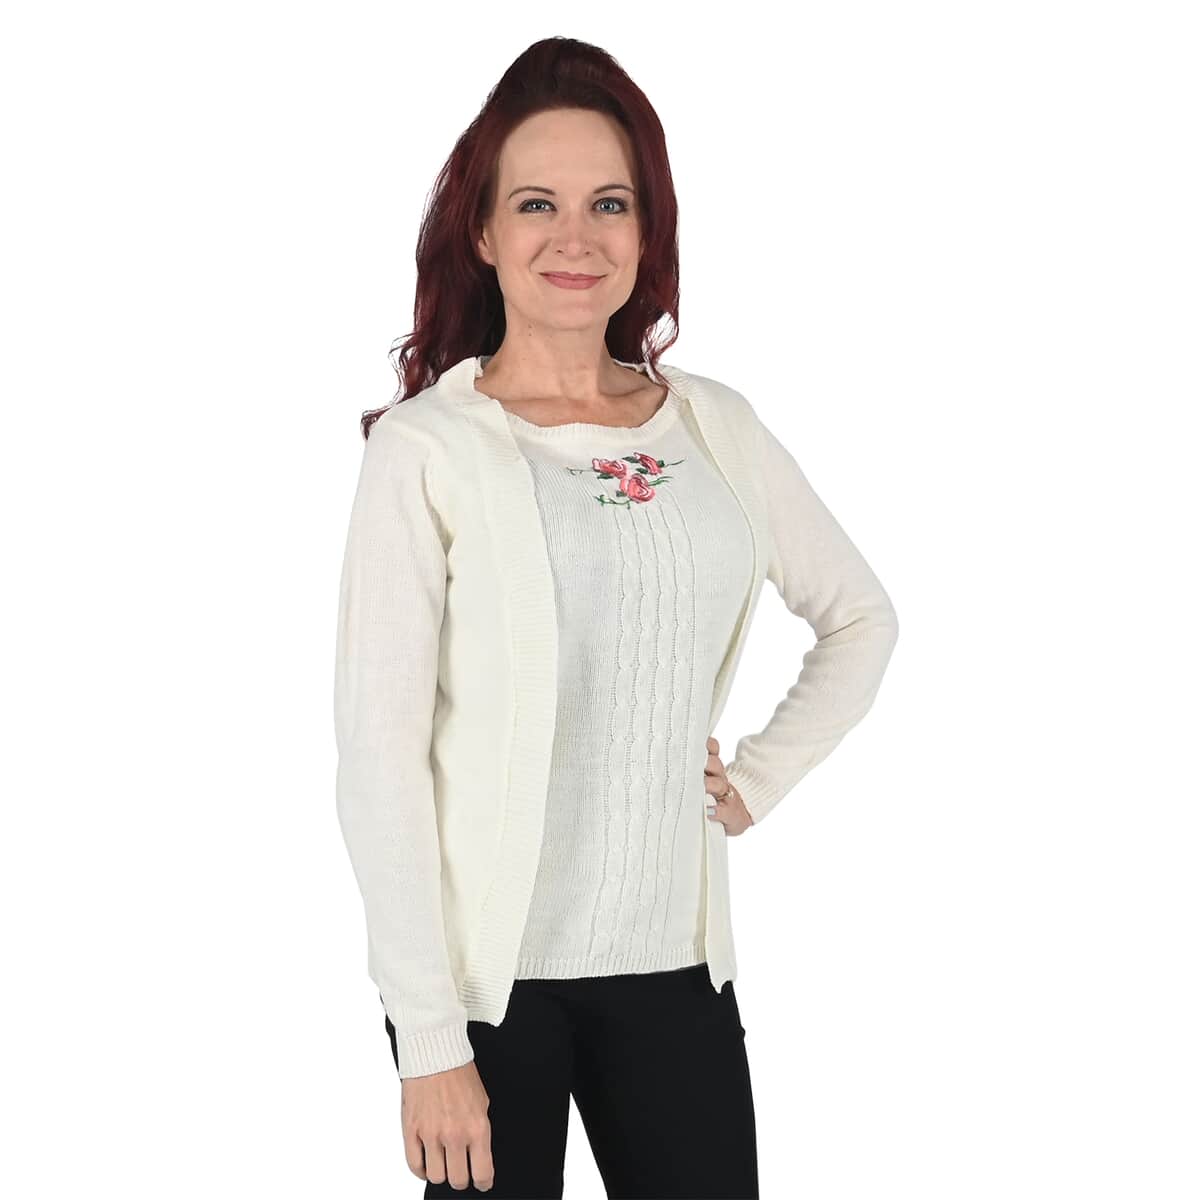 NY DESIGNER SWEATER CLOSEOUT - EVELYN TAYLOR Mock 2-in-1 Twin Set Sweater in Ivory - Size L image number 0